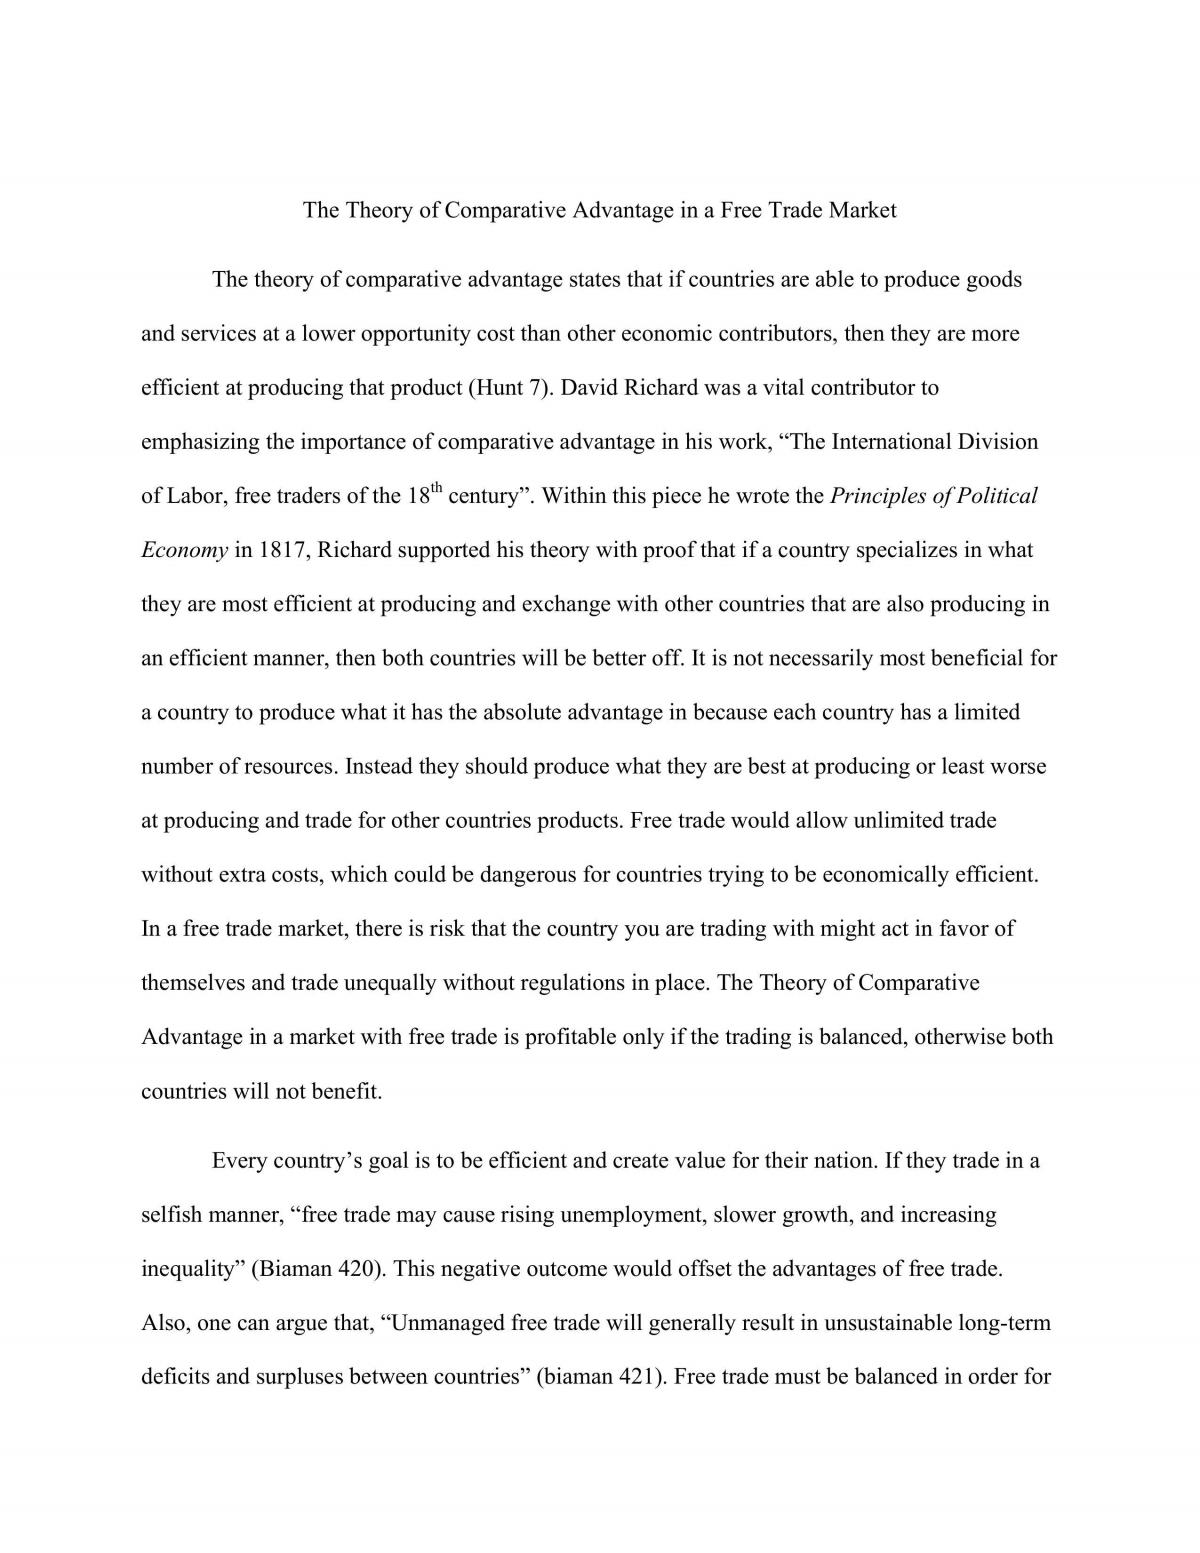 Short Essay Assignment- The Theory of comparative Advantage in a Free Trade Market - Page 1